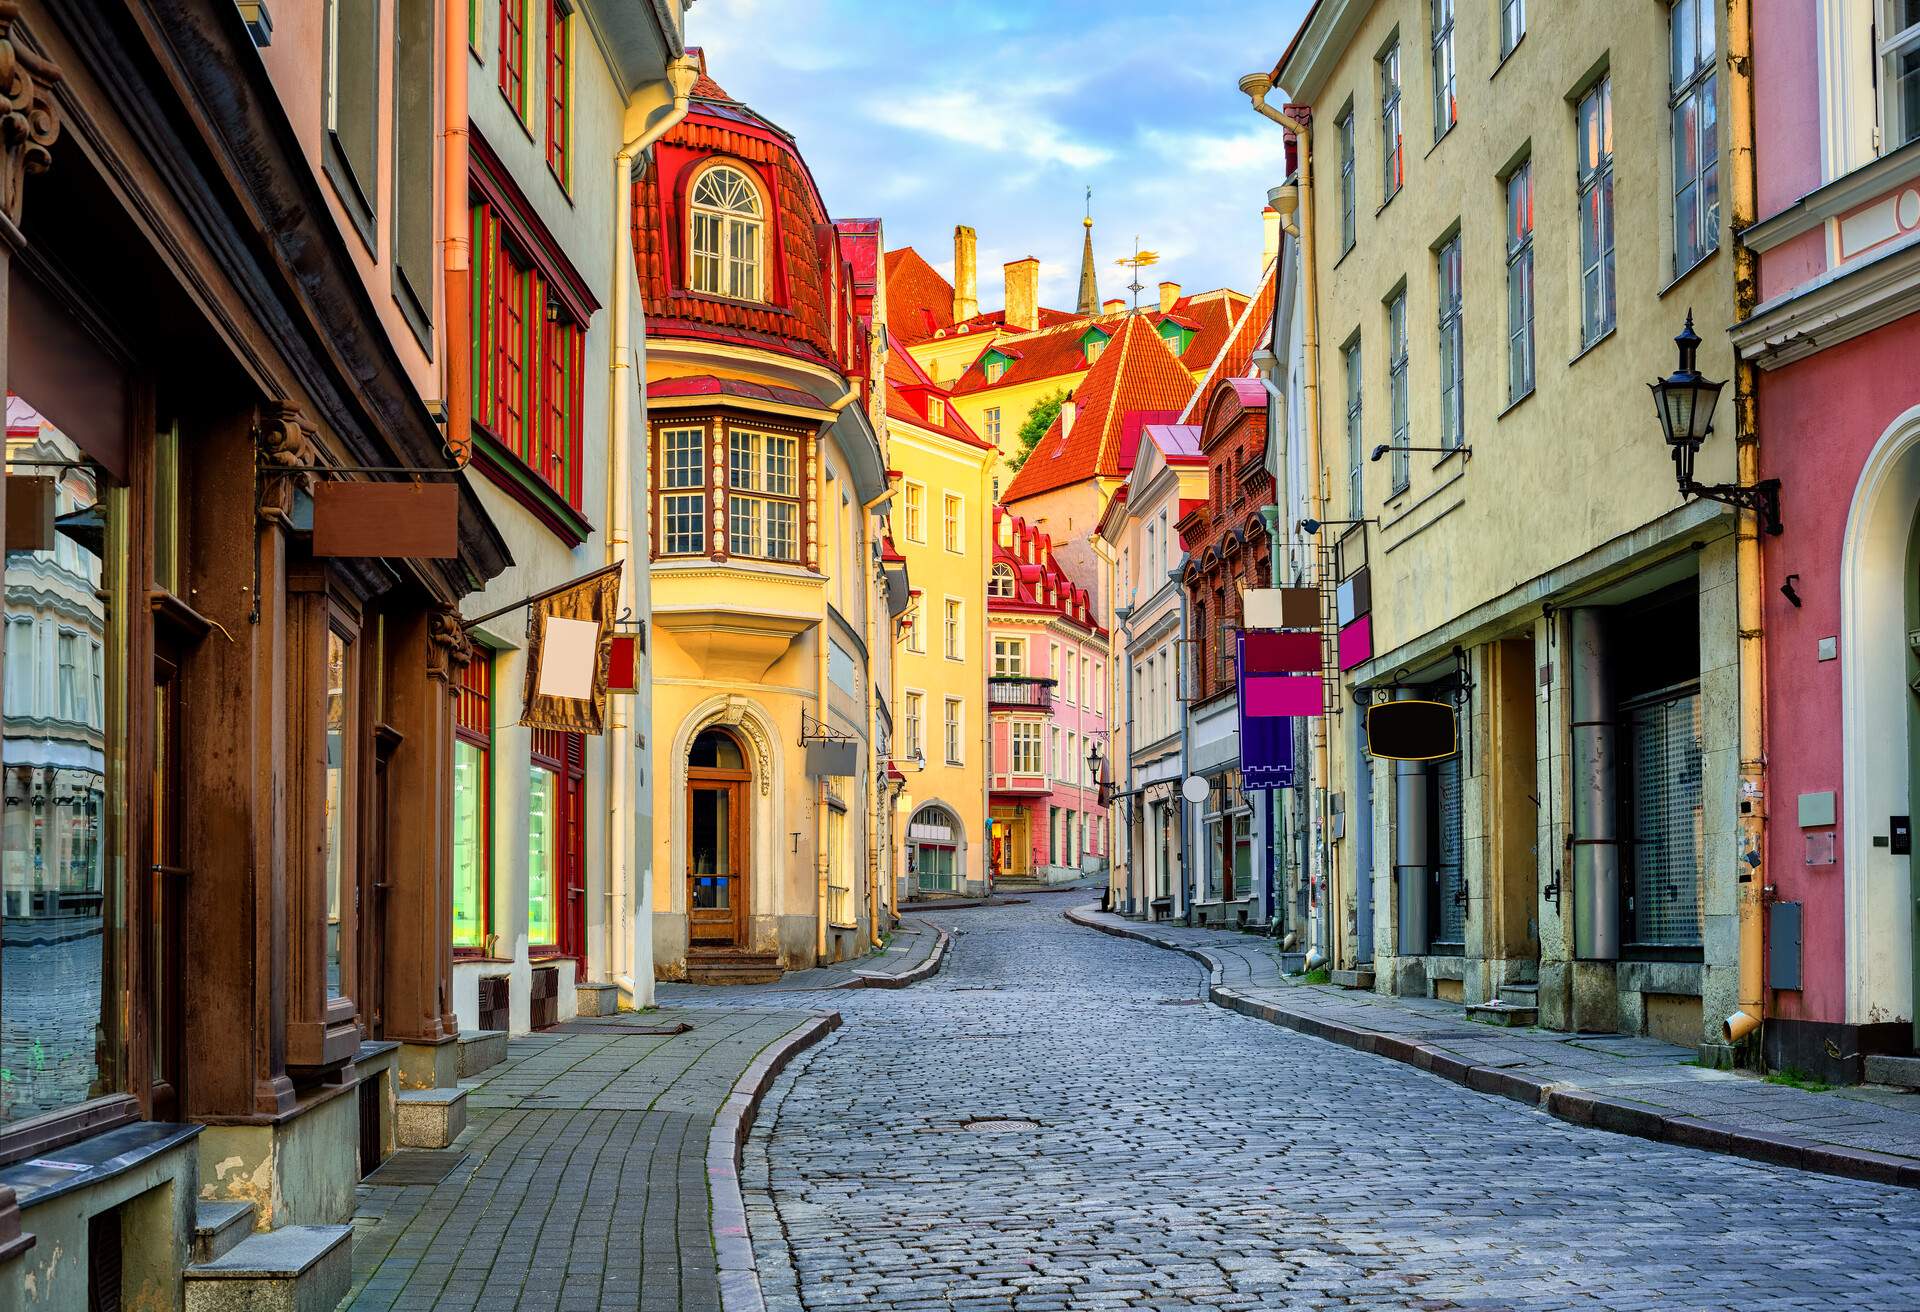 An empty, narrow street, paved with rustic bricks, is flanked by an array of colourful buildings, creating a peaceful yet vibrant urban landscape.